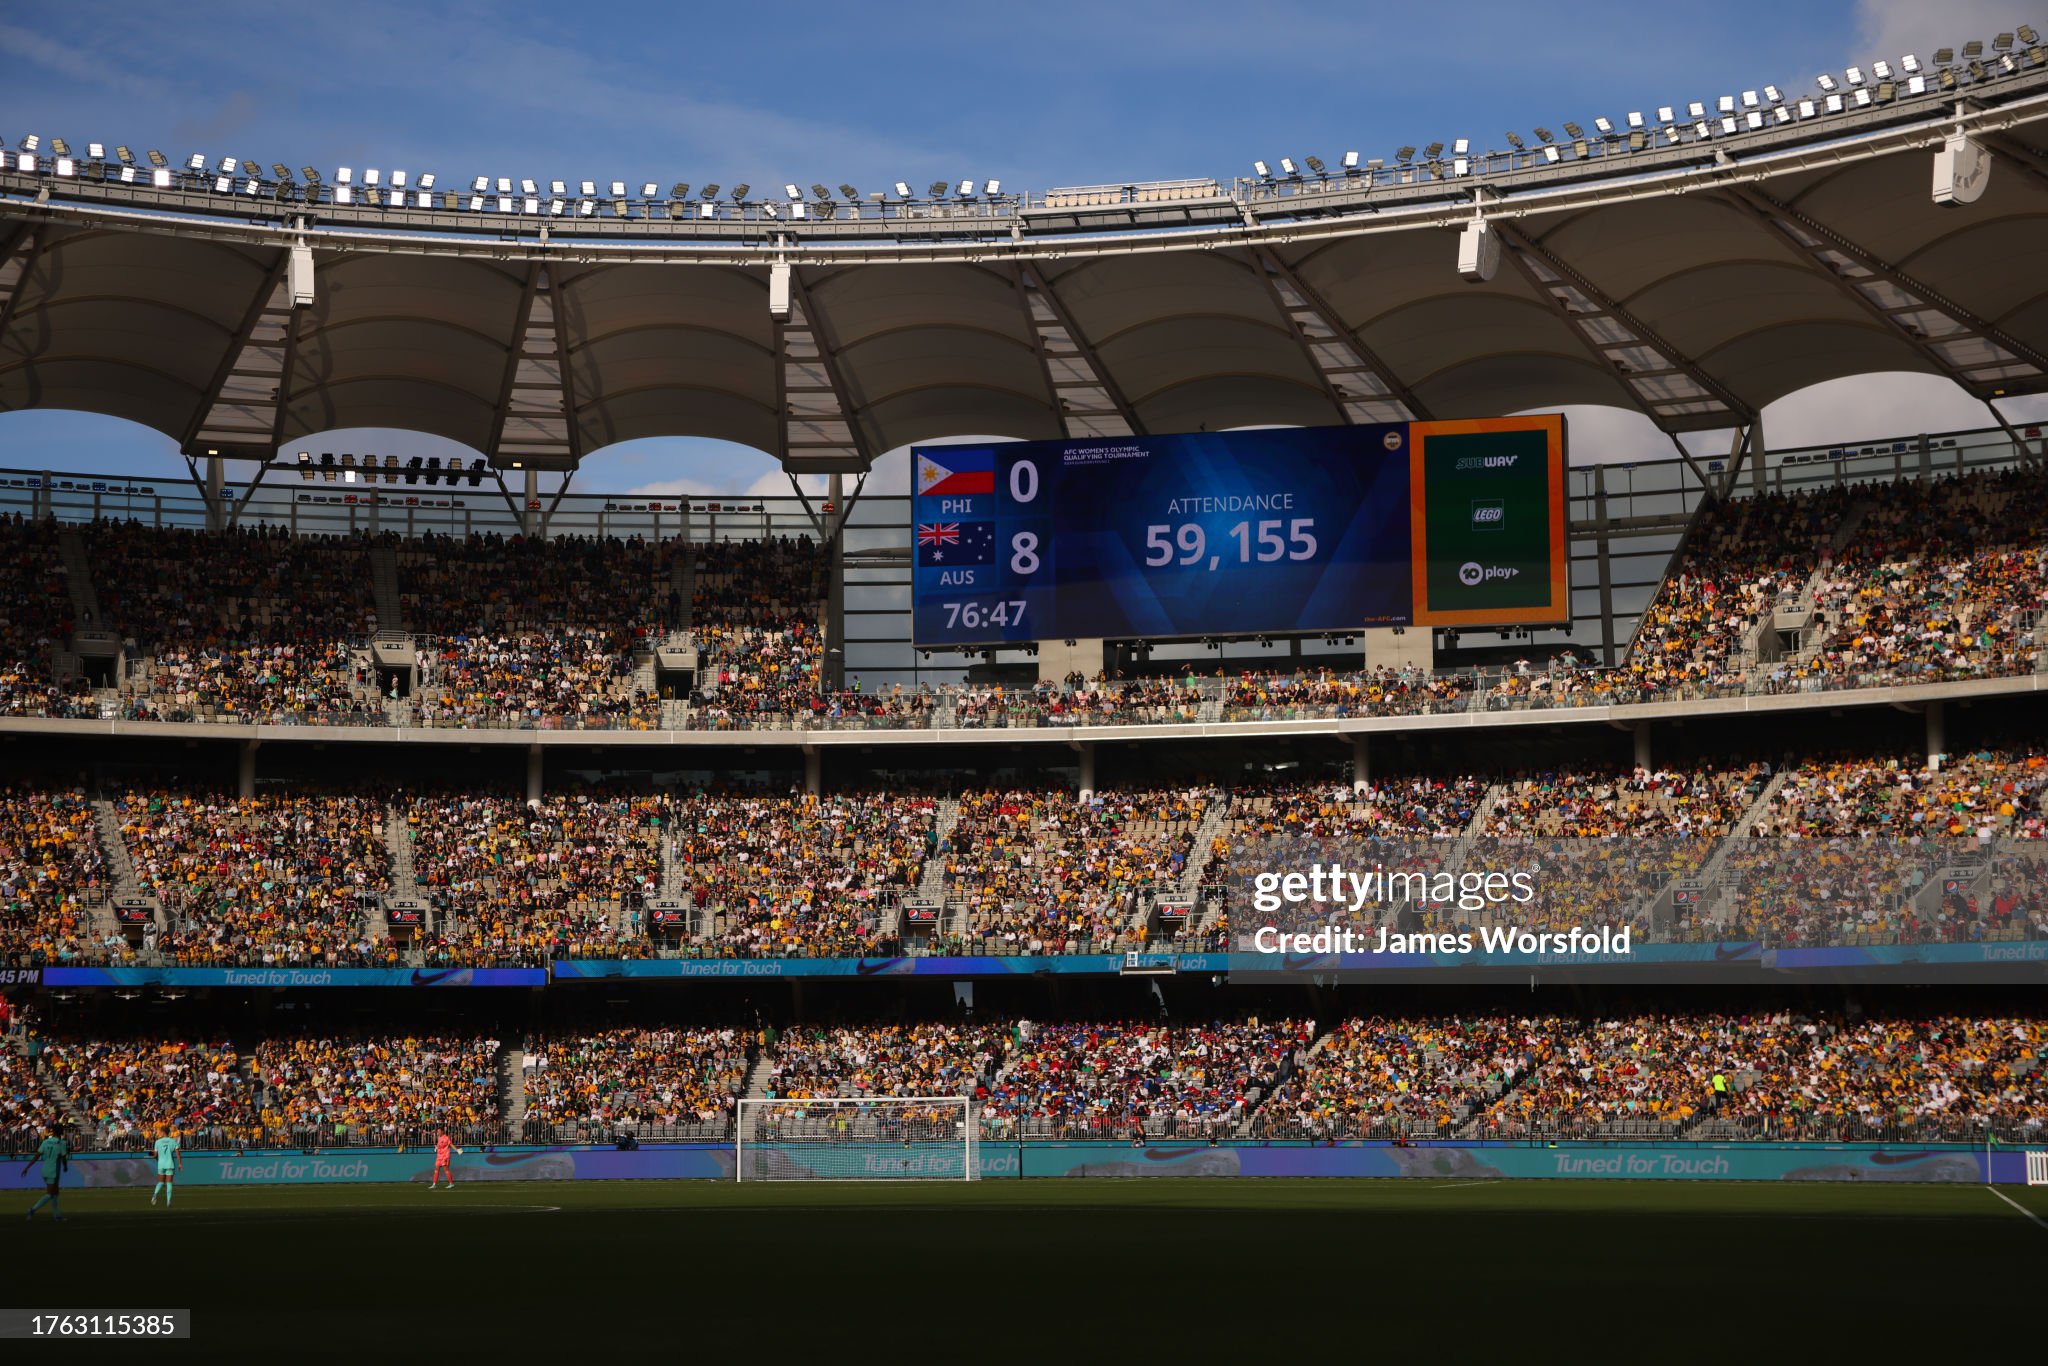 PERTH, AUSTRALIA - OCTOBER 29: General view of the Optus Stadium crowd during the AFC Women's Asian Olympic Qualifier match between Philippines and Australia Matildas at Optus Stadium on October 29, 2023 in Perth, Australia. (Photo by James Worsfold/Getty Images)